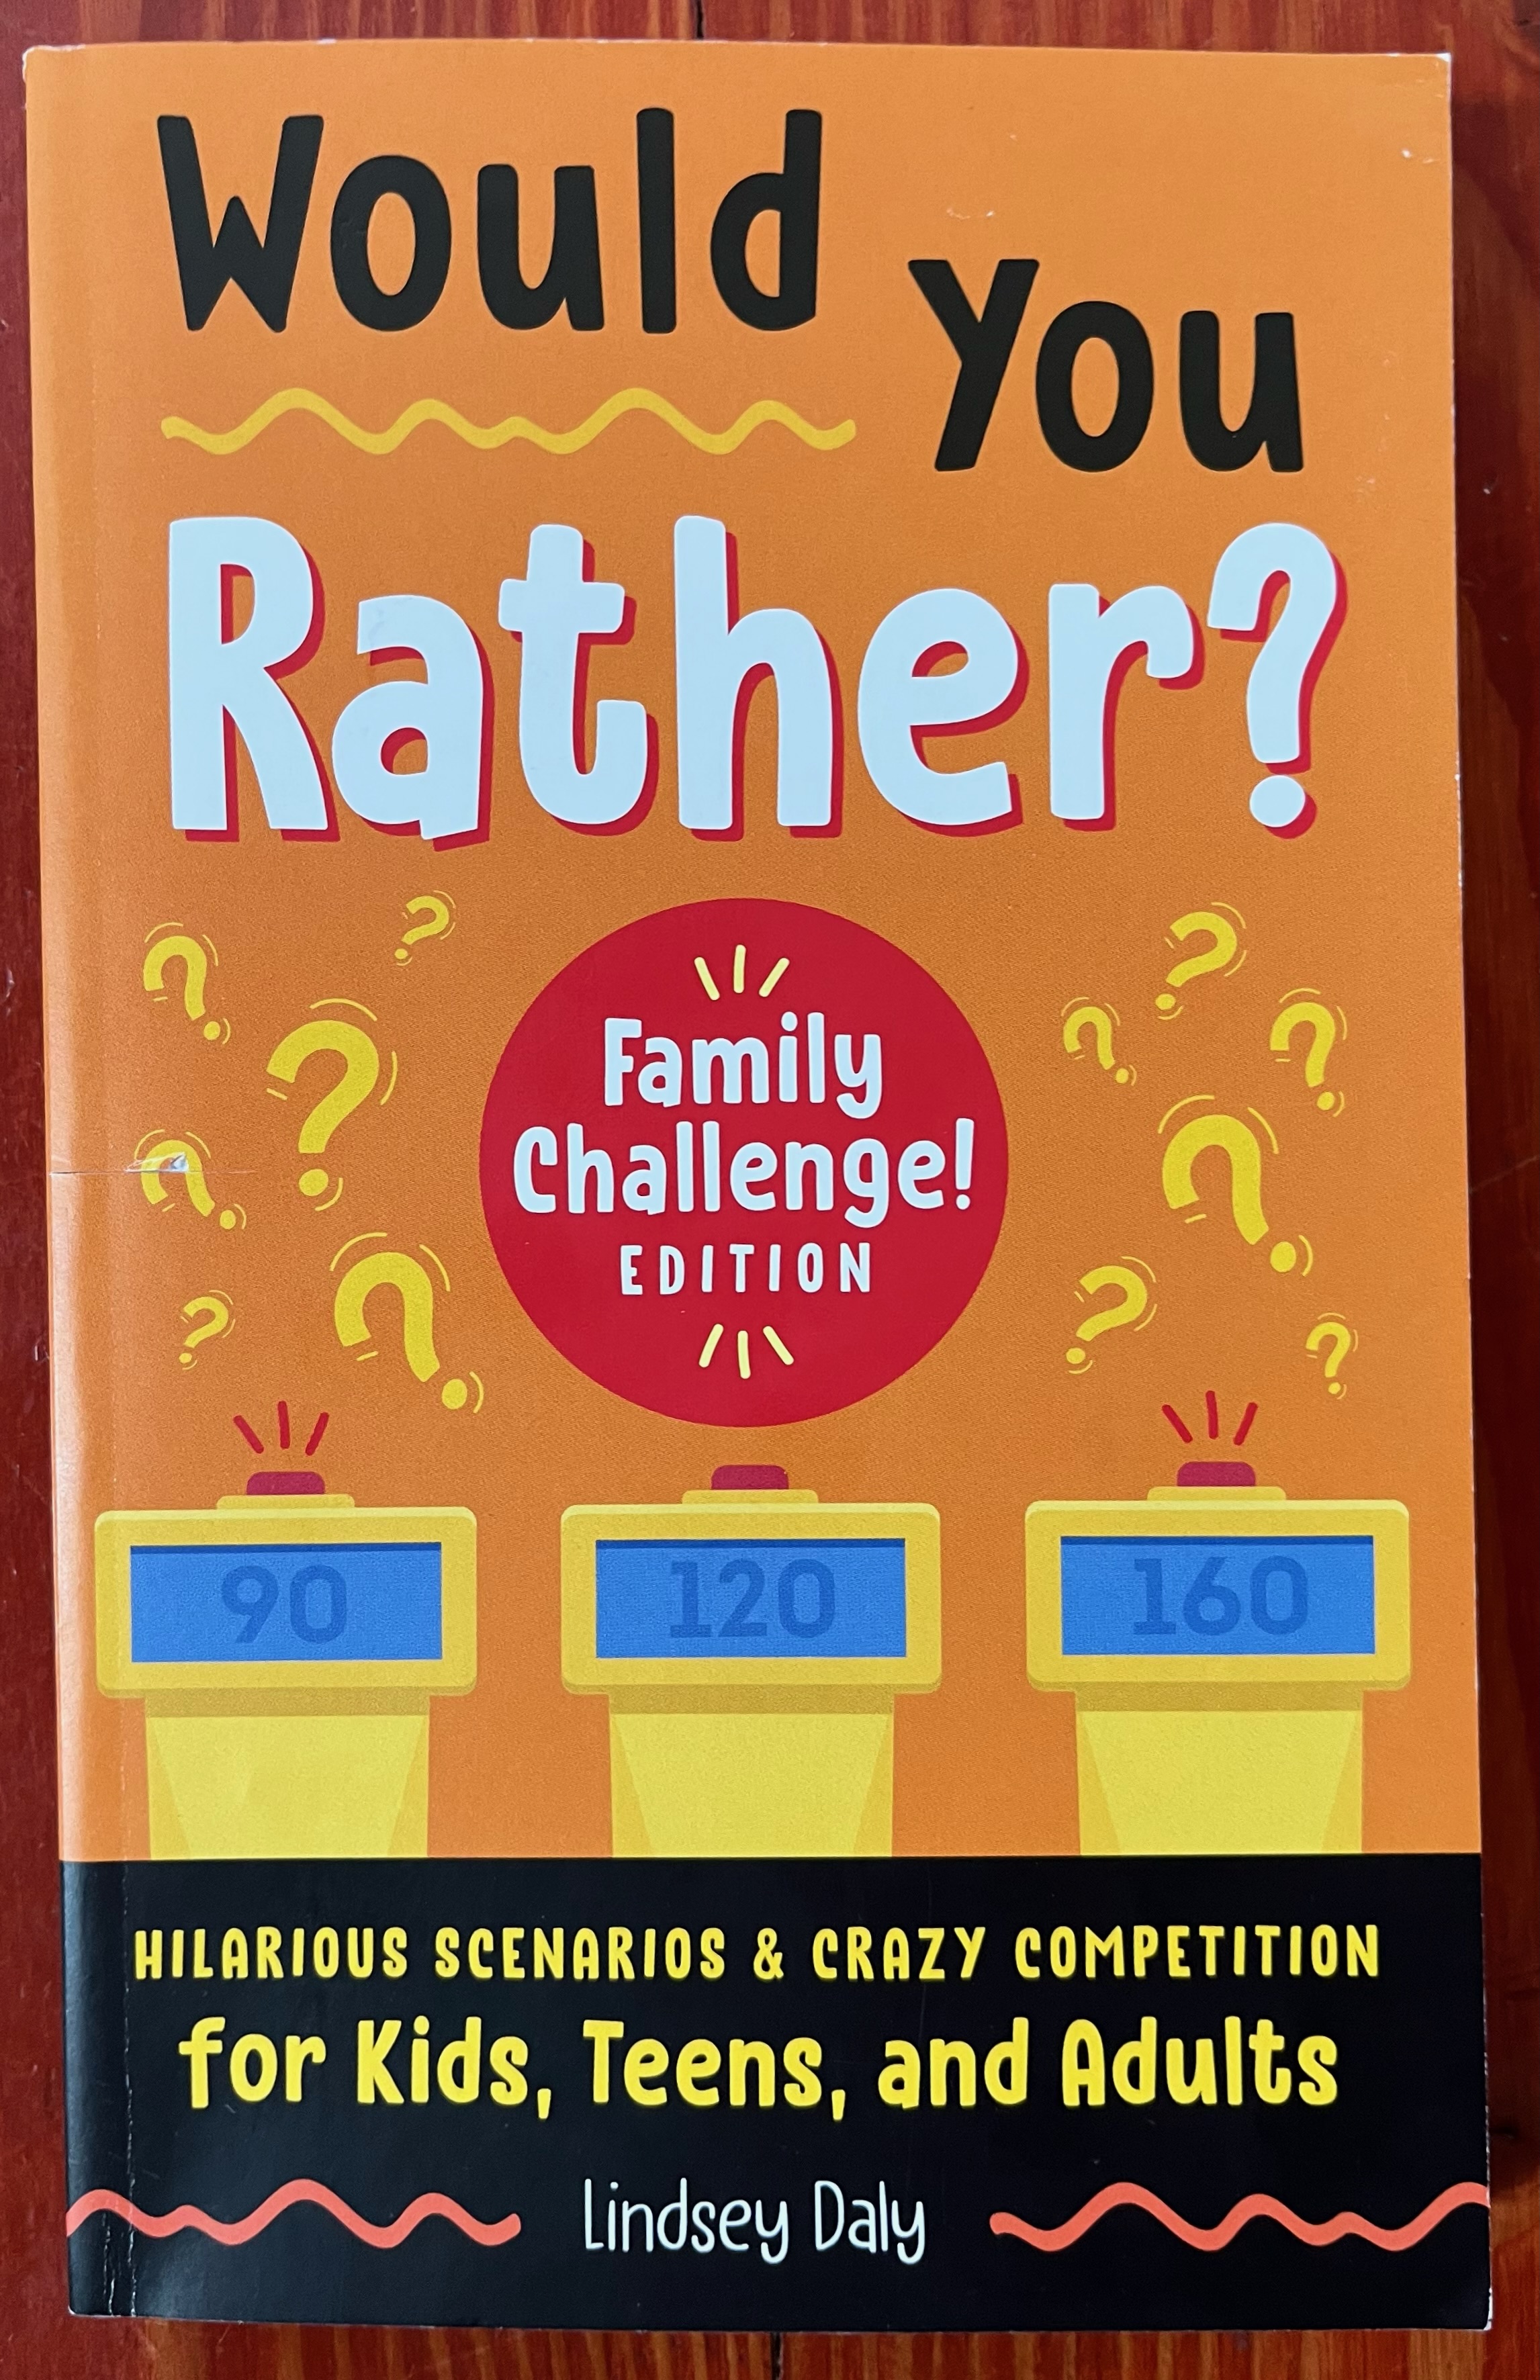 Would You Rather Family Challenge Edition book by Lindsey Daly